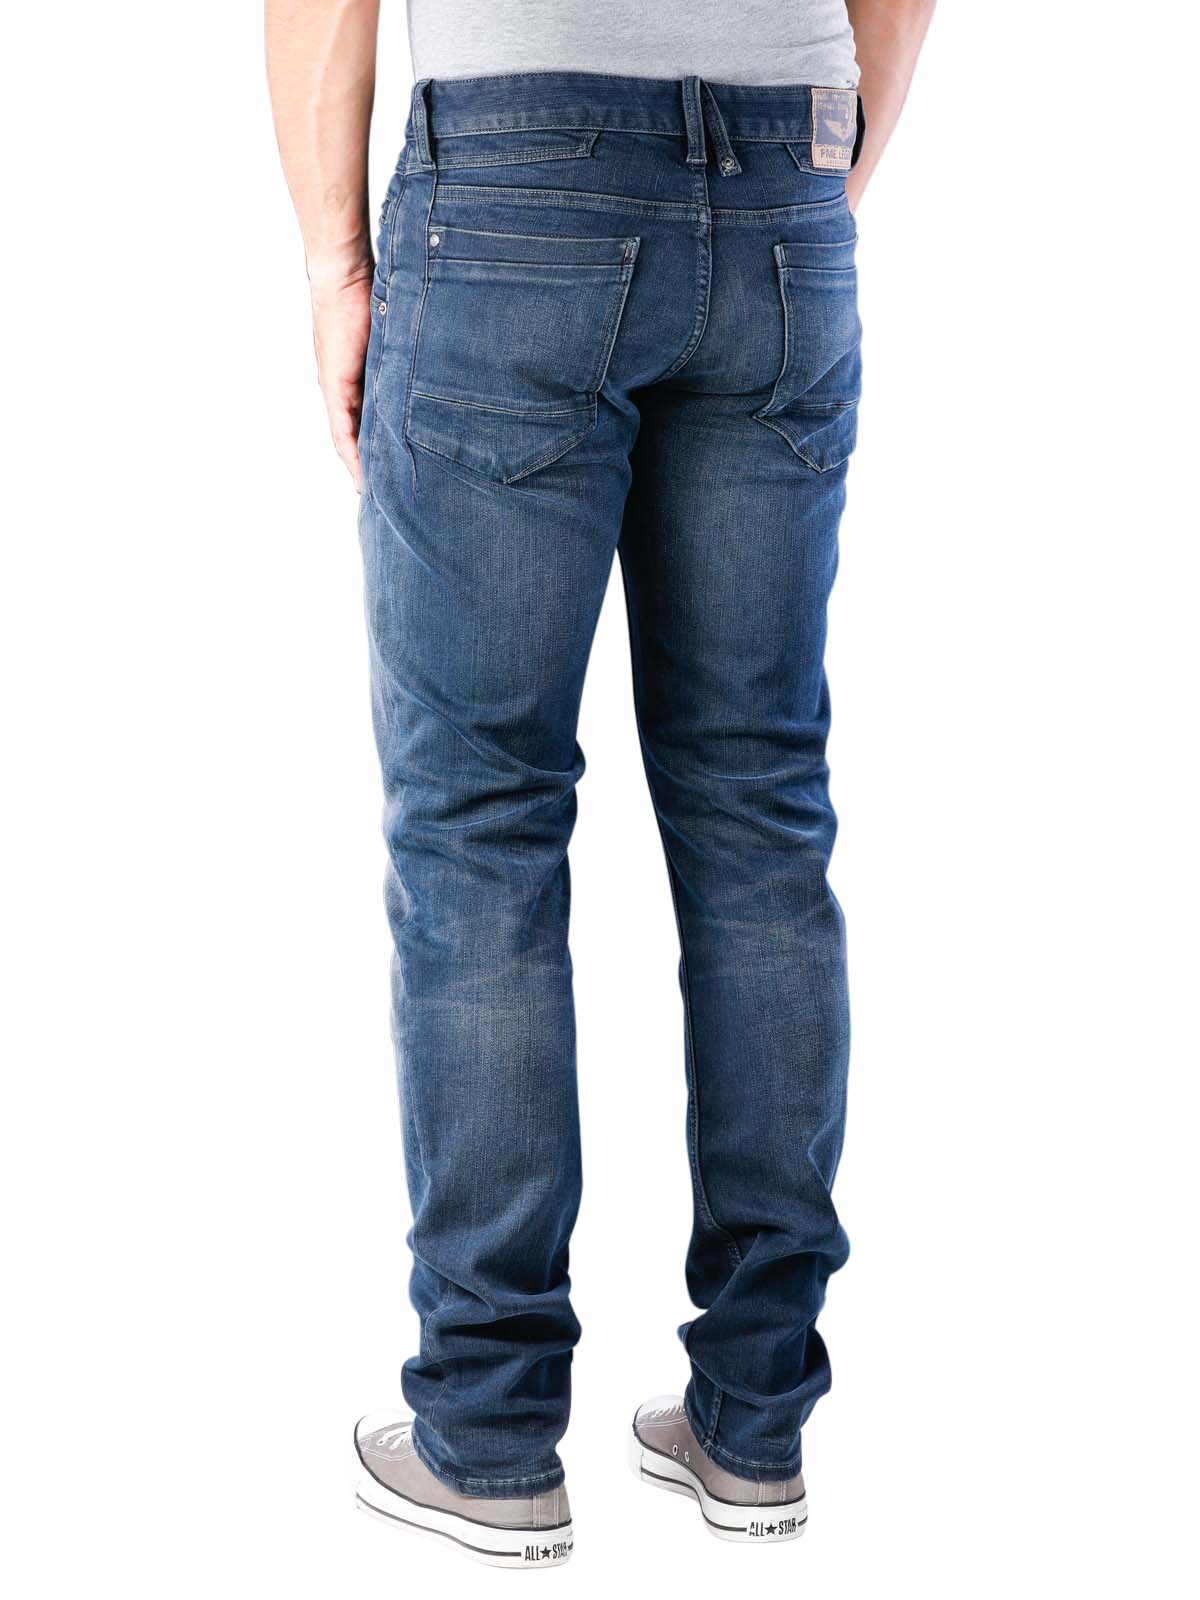 pme legend curtis jeans relaxed fit